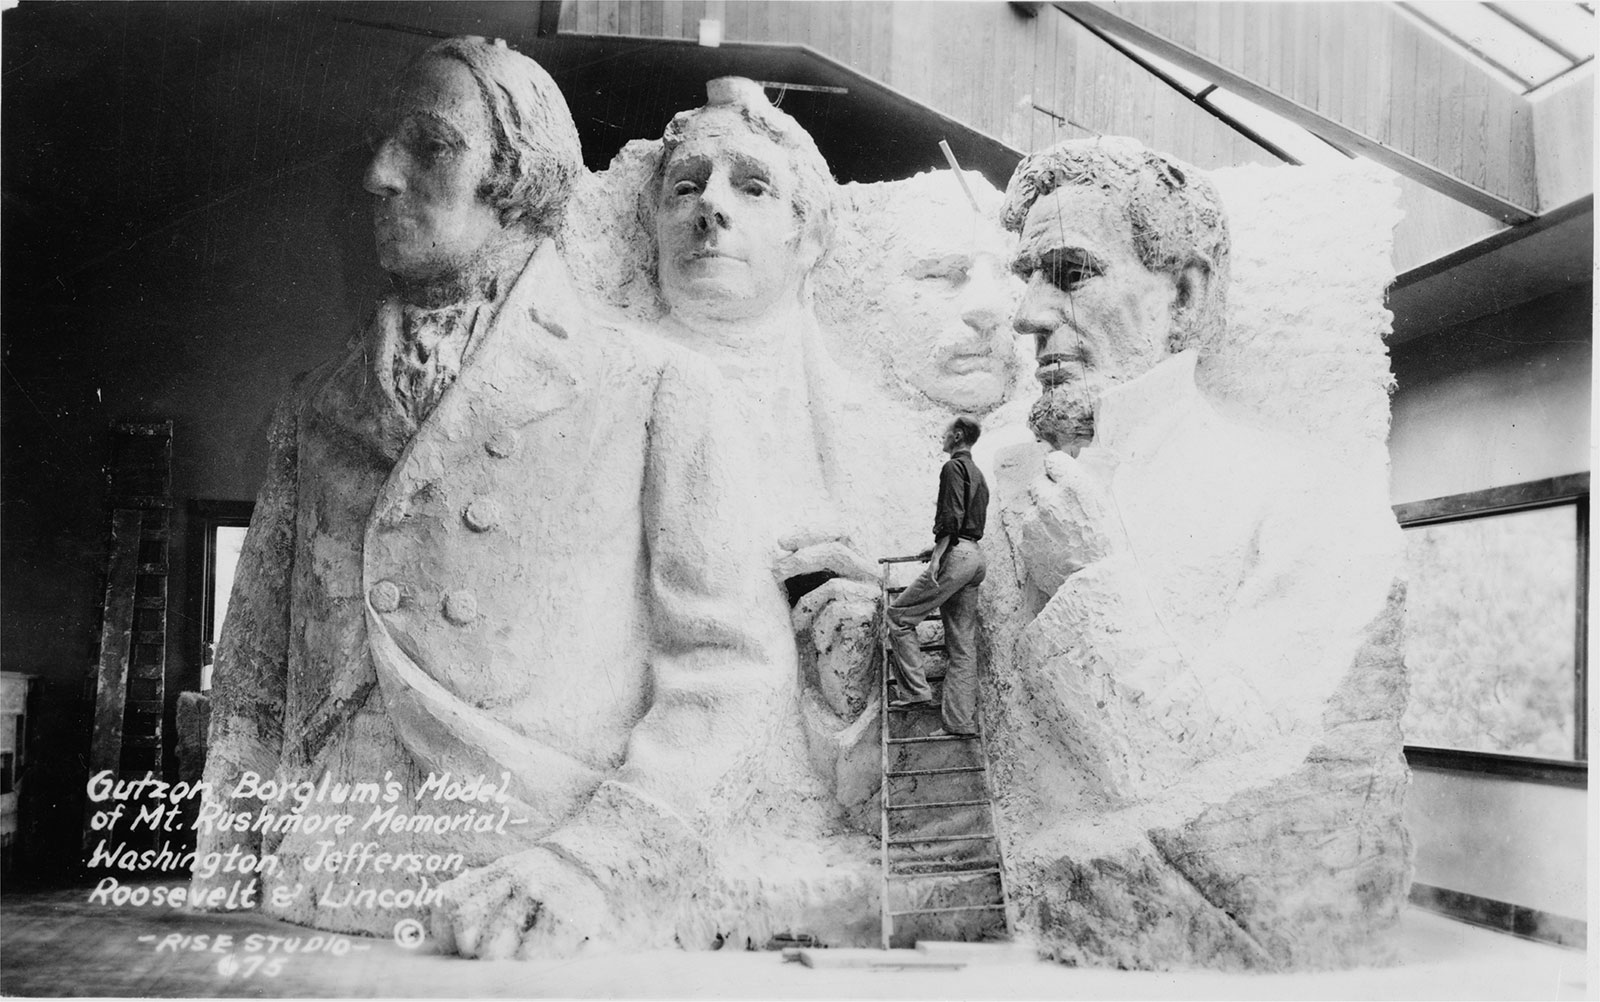 This is what Mount Rushmore was supposed to look like if they hadn't run out of funding in 1941